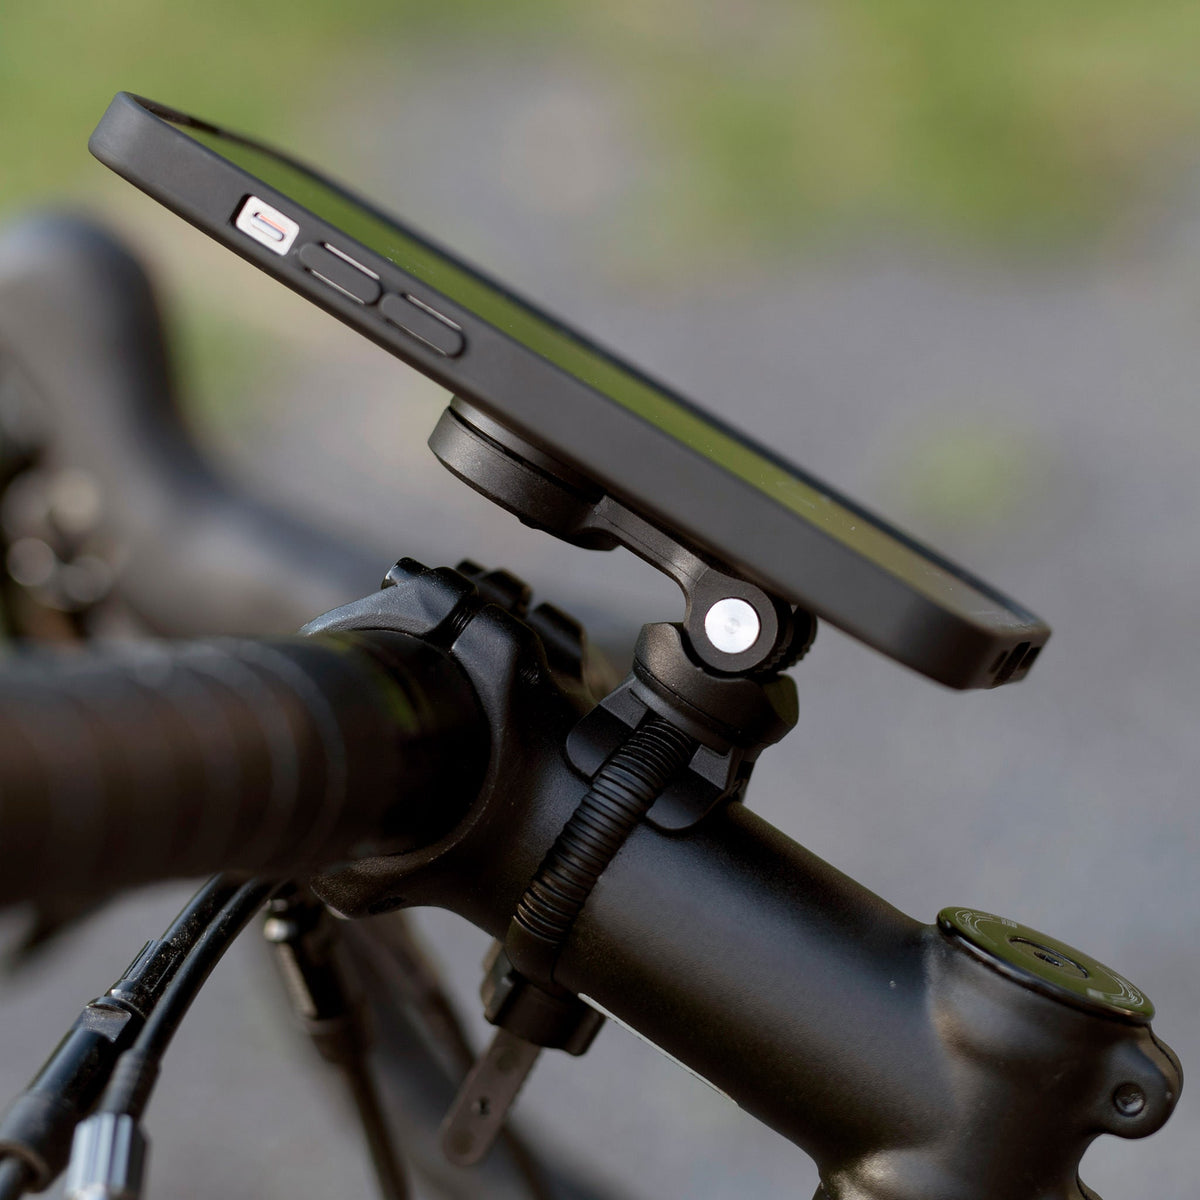 Smartphone Bike Mount, Buy Smartphone Bike Mount here